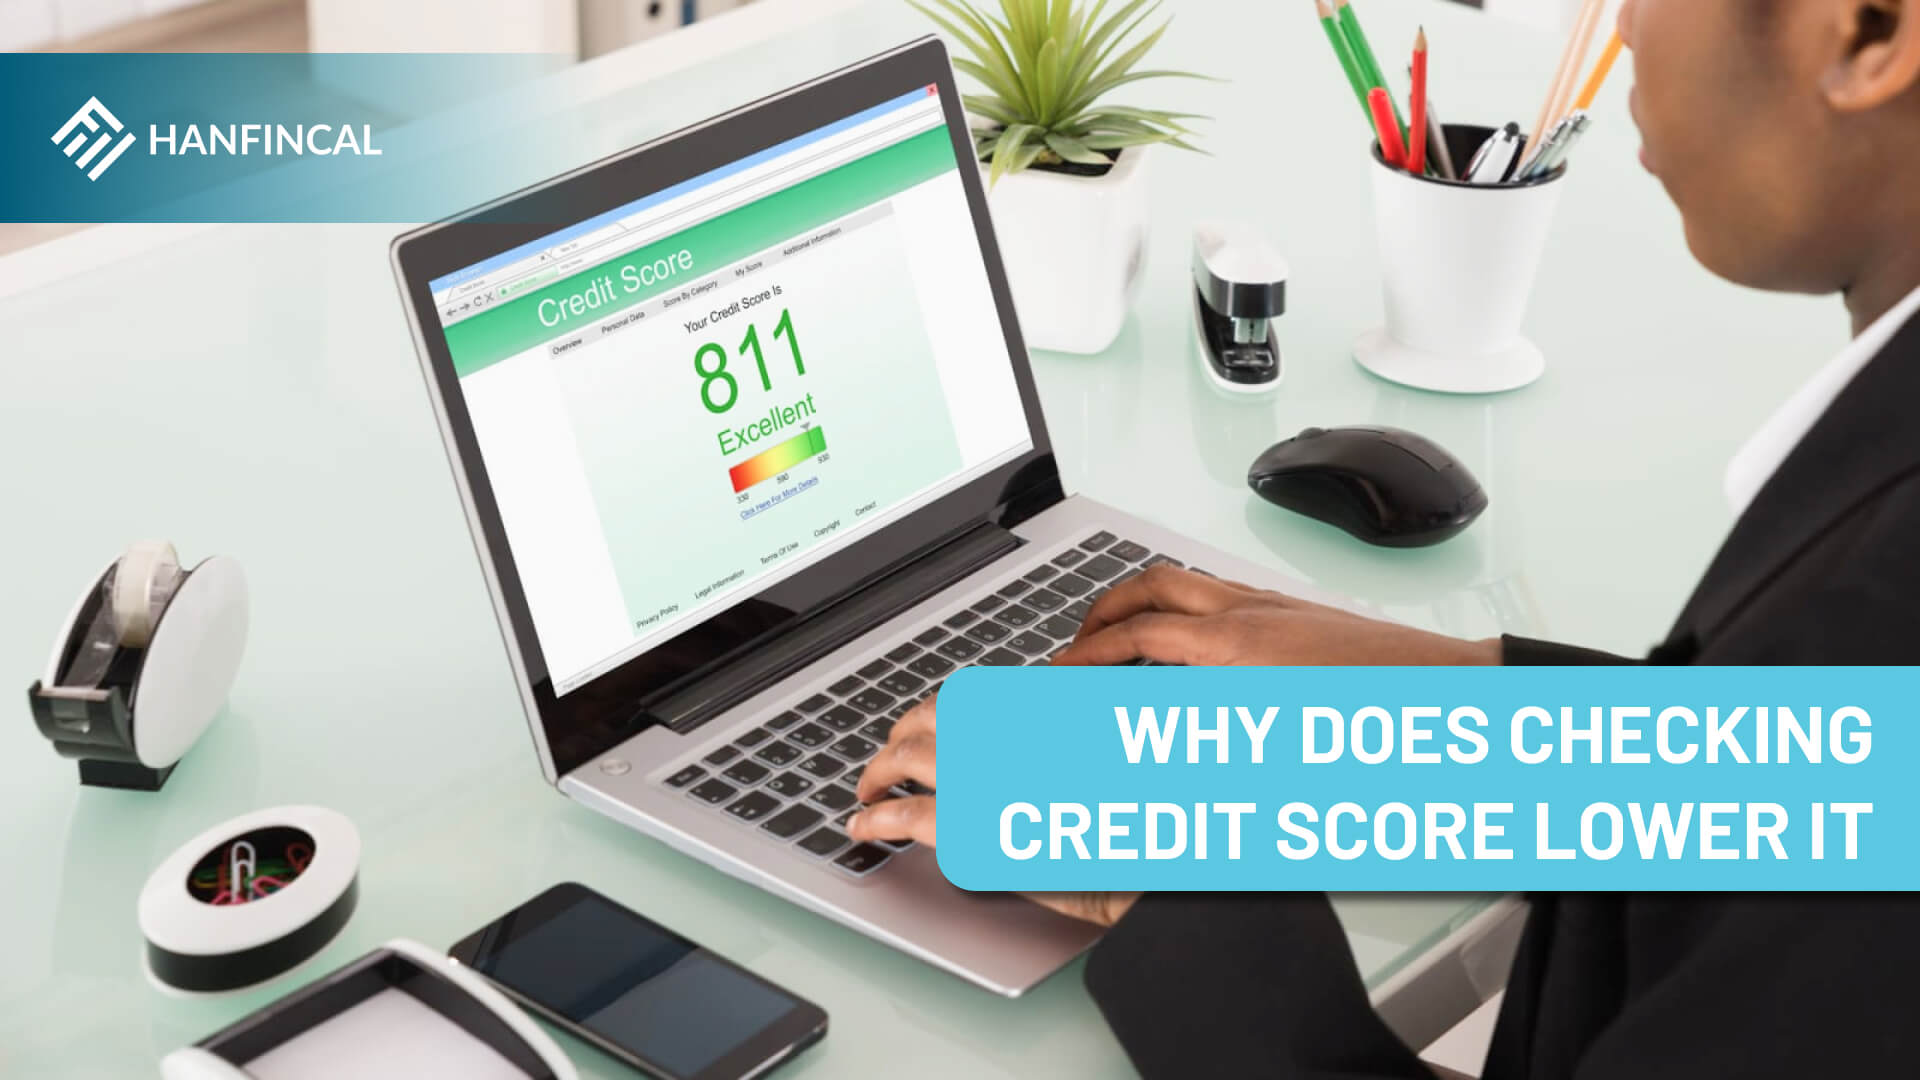 Why does checking my credit score lower it?